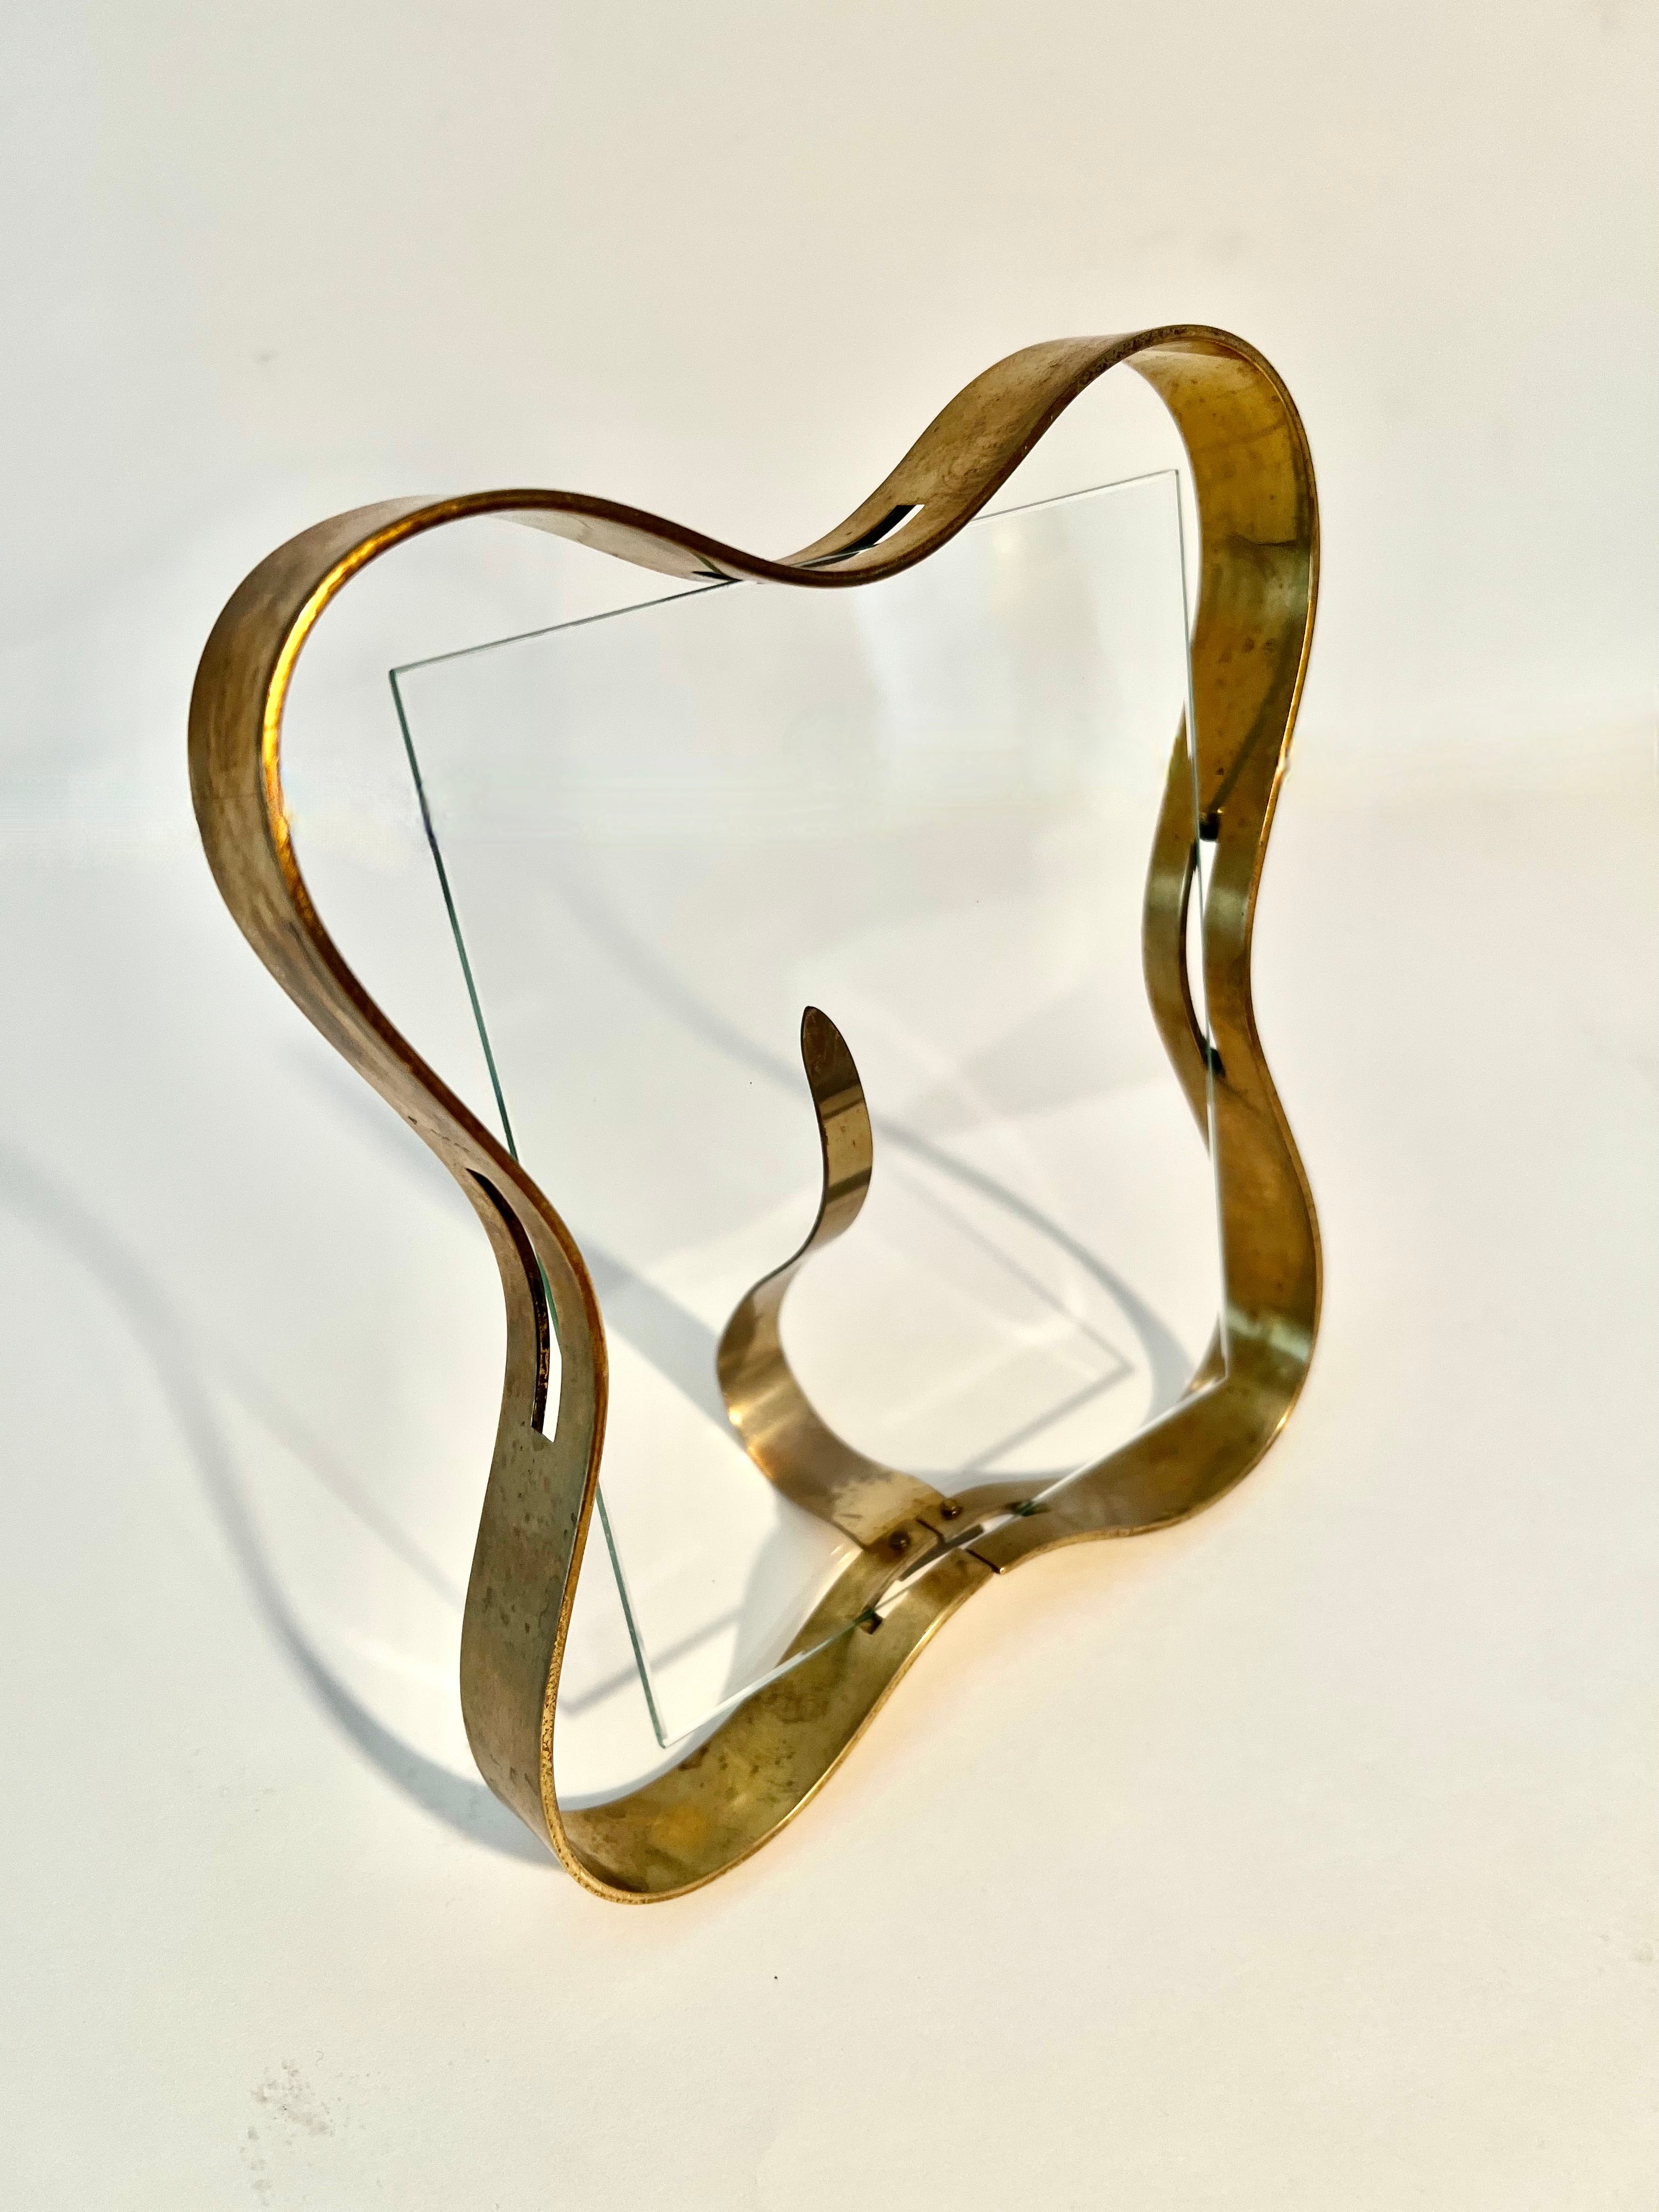 Fontana Arte Solid Brass Picture frame with a uniquely designed support, that also is used as the piece that hold the image agains the glass.

Designed in the 60s, a true Mid-Century Modern piece. A compliment to many places from on a desk or work